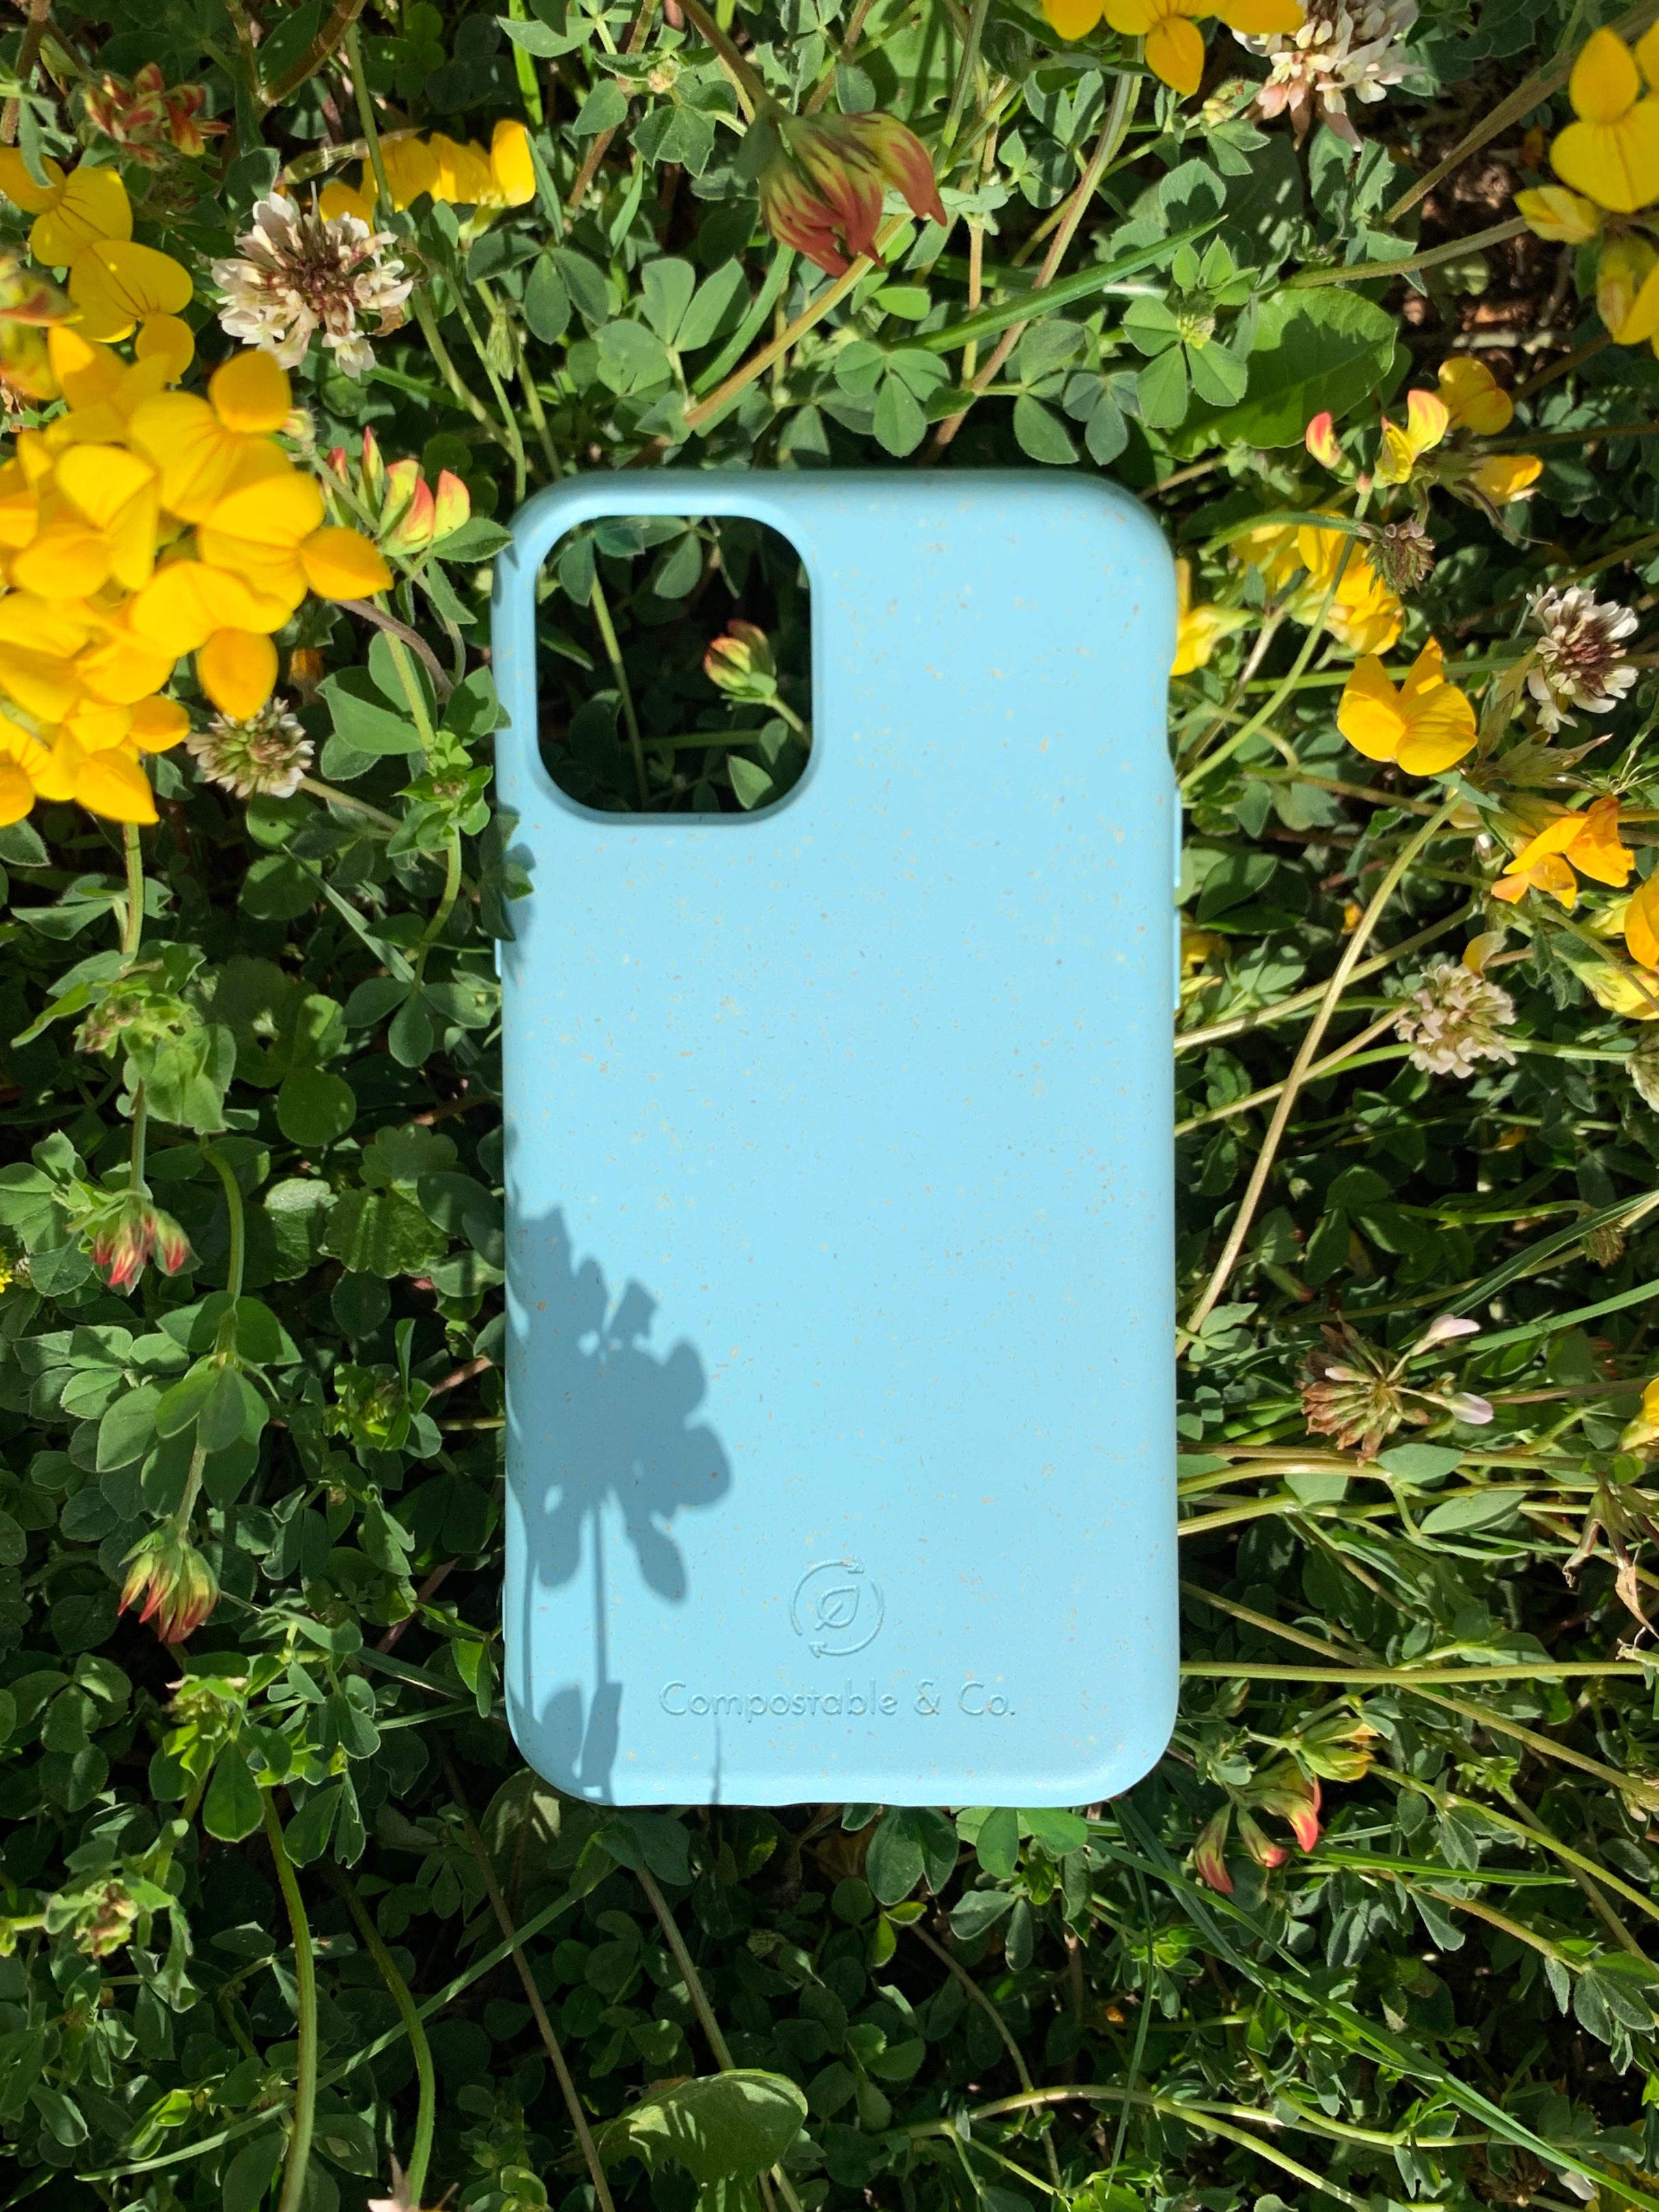 Compostable & Co. iPhone 12 mini blue biodegradable phone case in nature